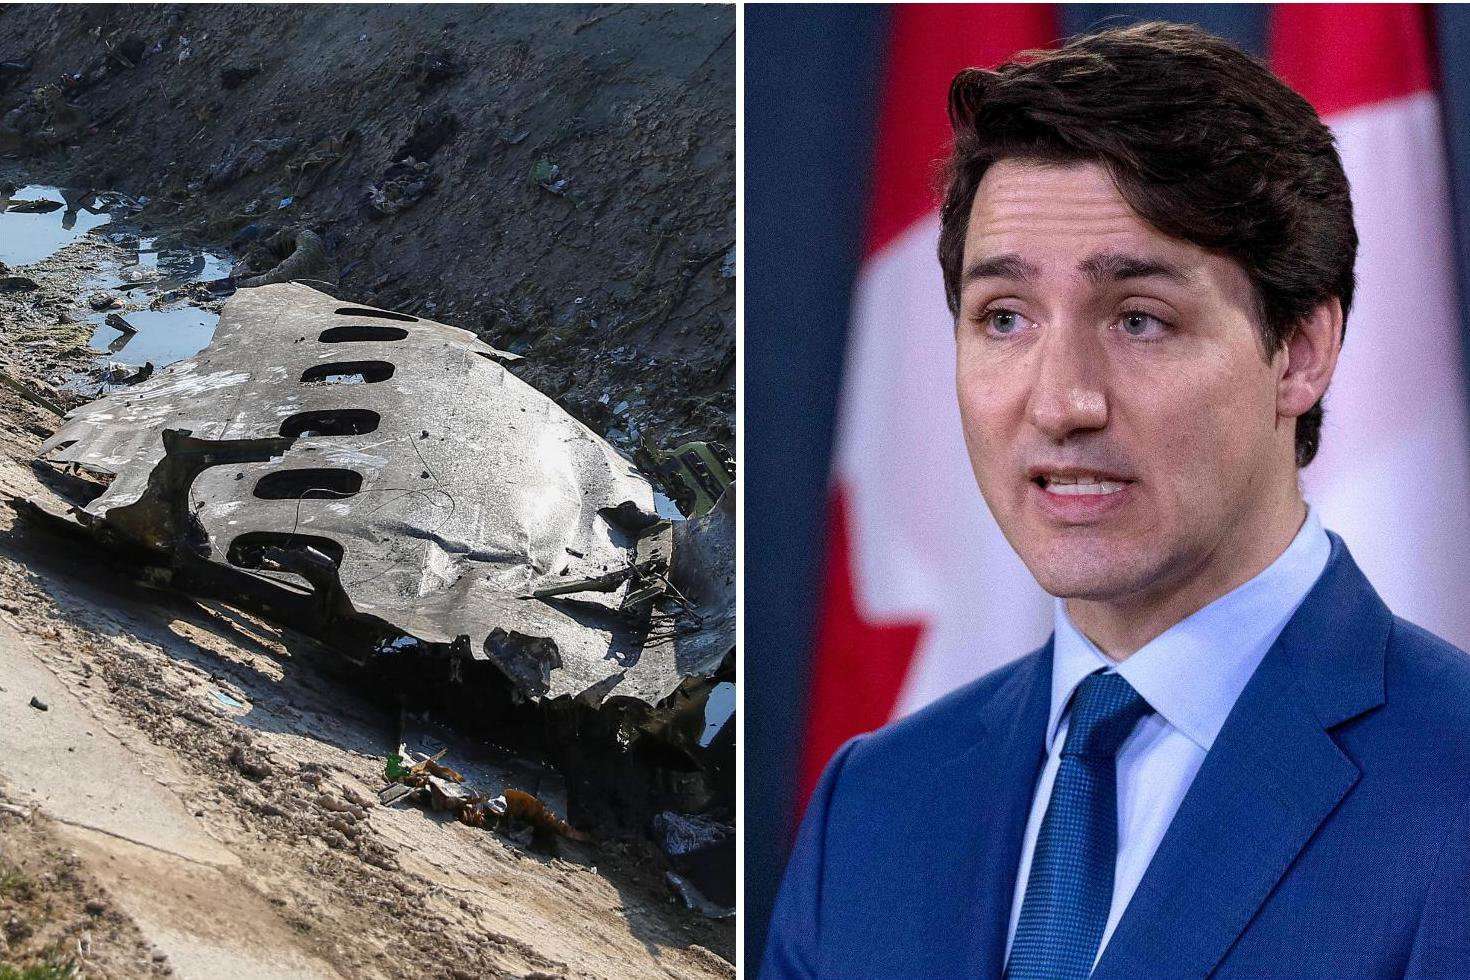 image for Justin Trudeau vows to get answers over Iran plane crash which killed 63 Canadians